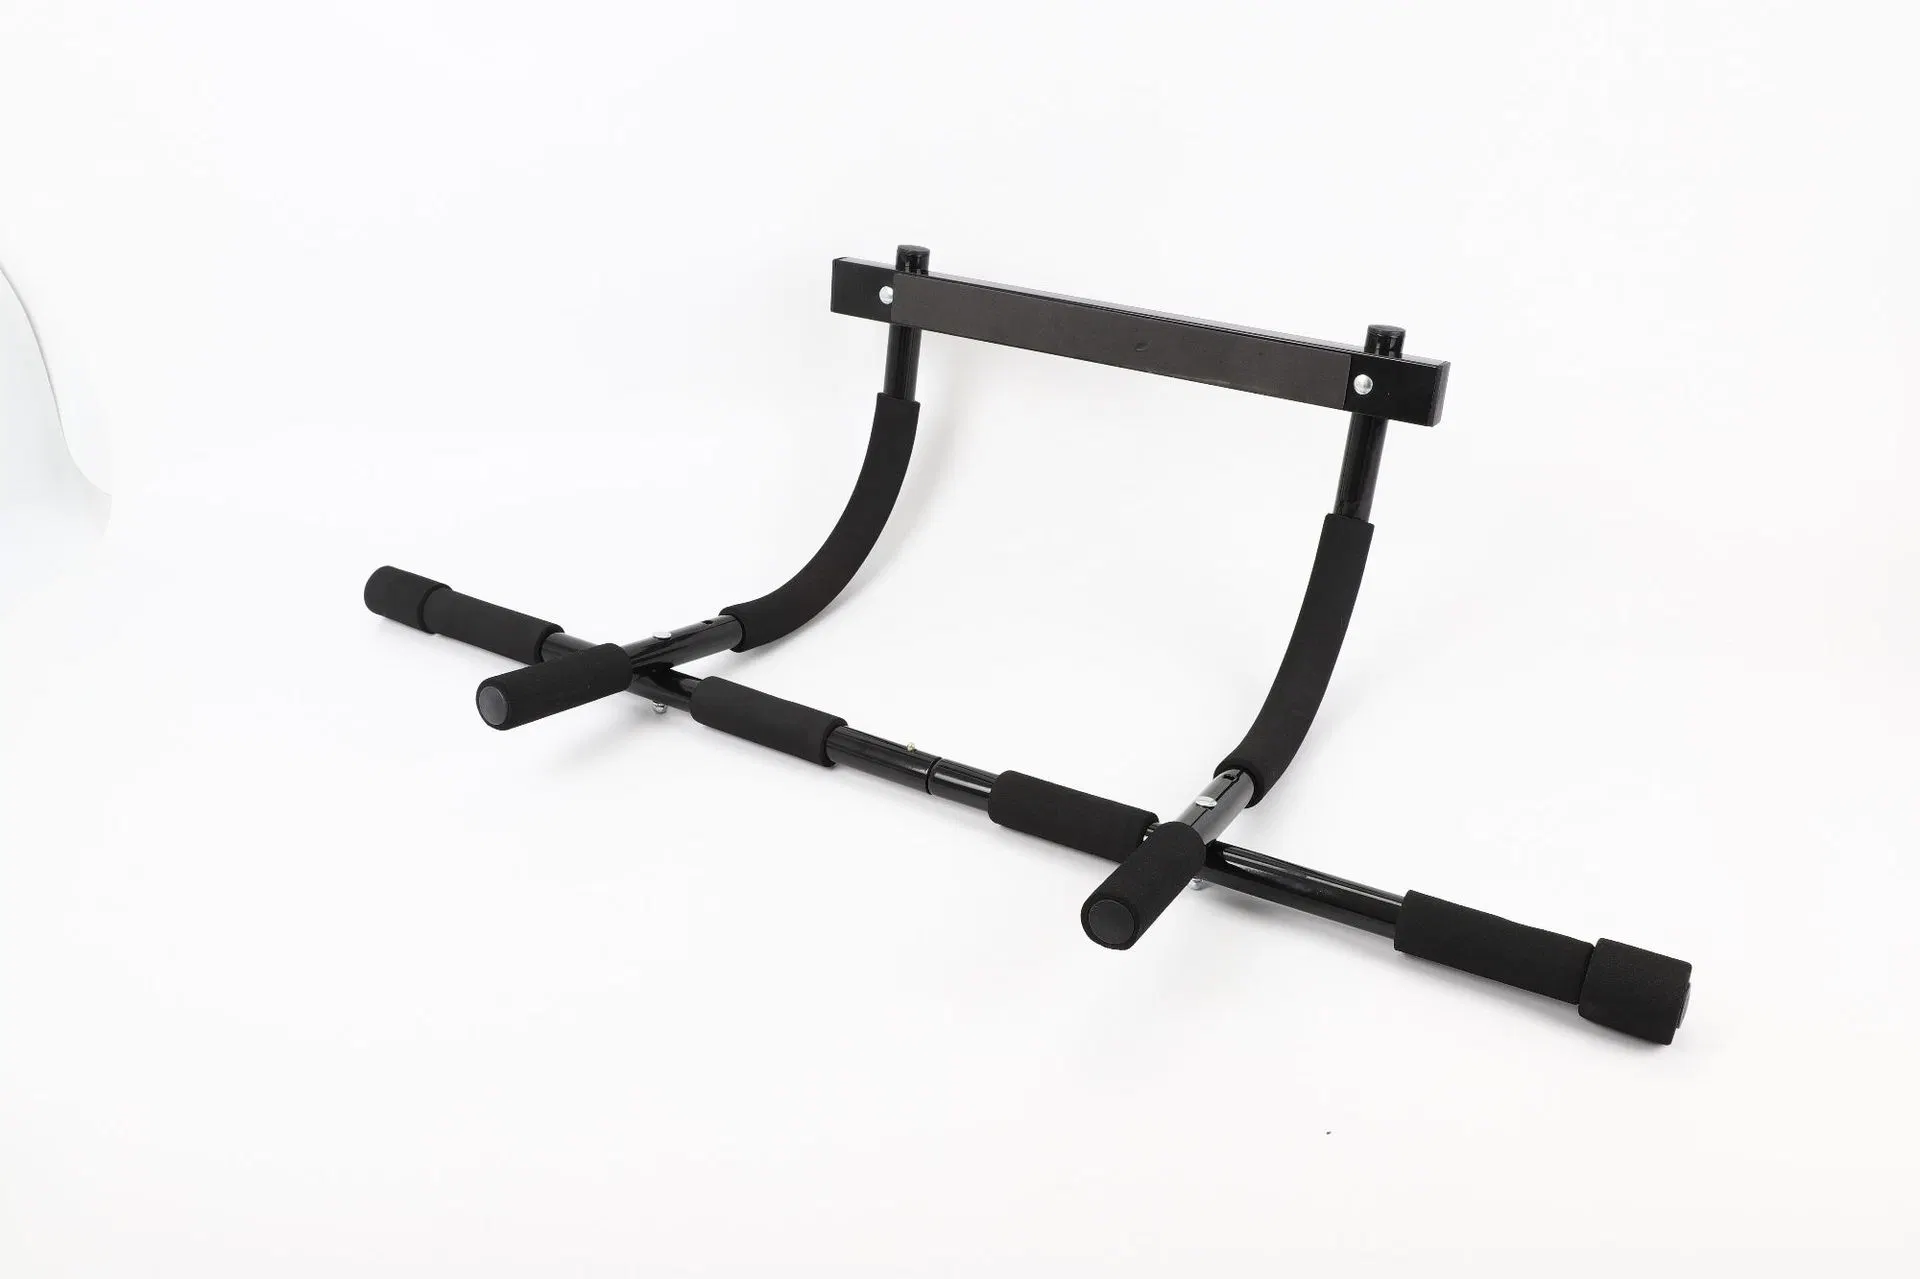 Exercise Door Doorway Pull up Bar Gym Bar Horizontal Wall Mount Portable Chin up Bar Home Gym Strength Equipment